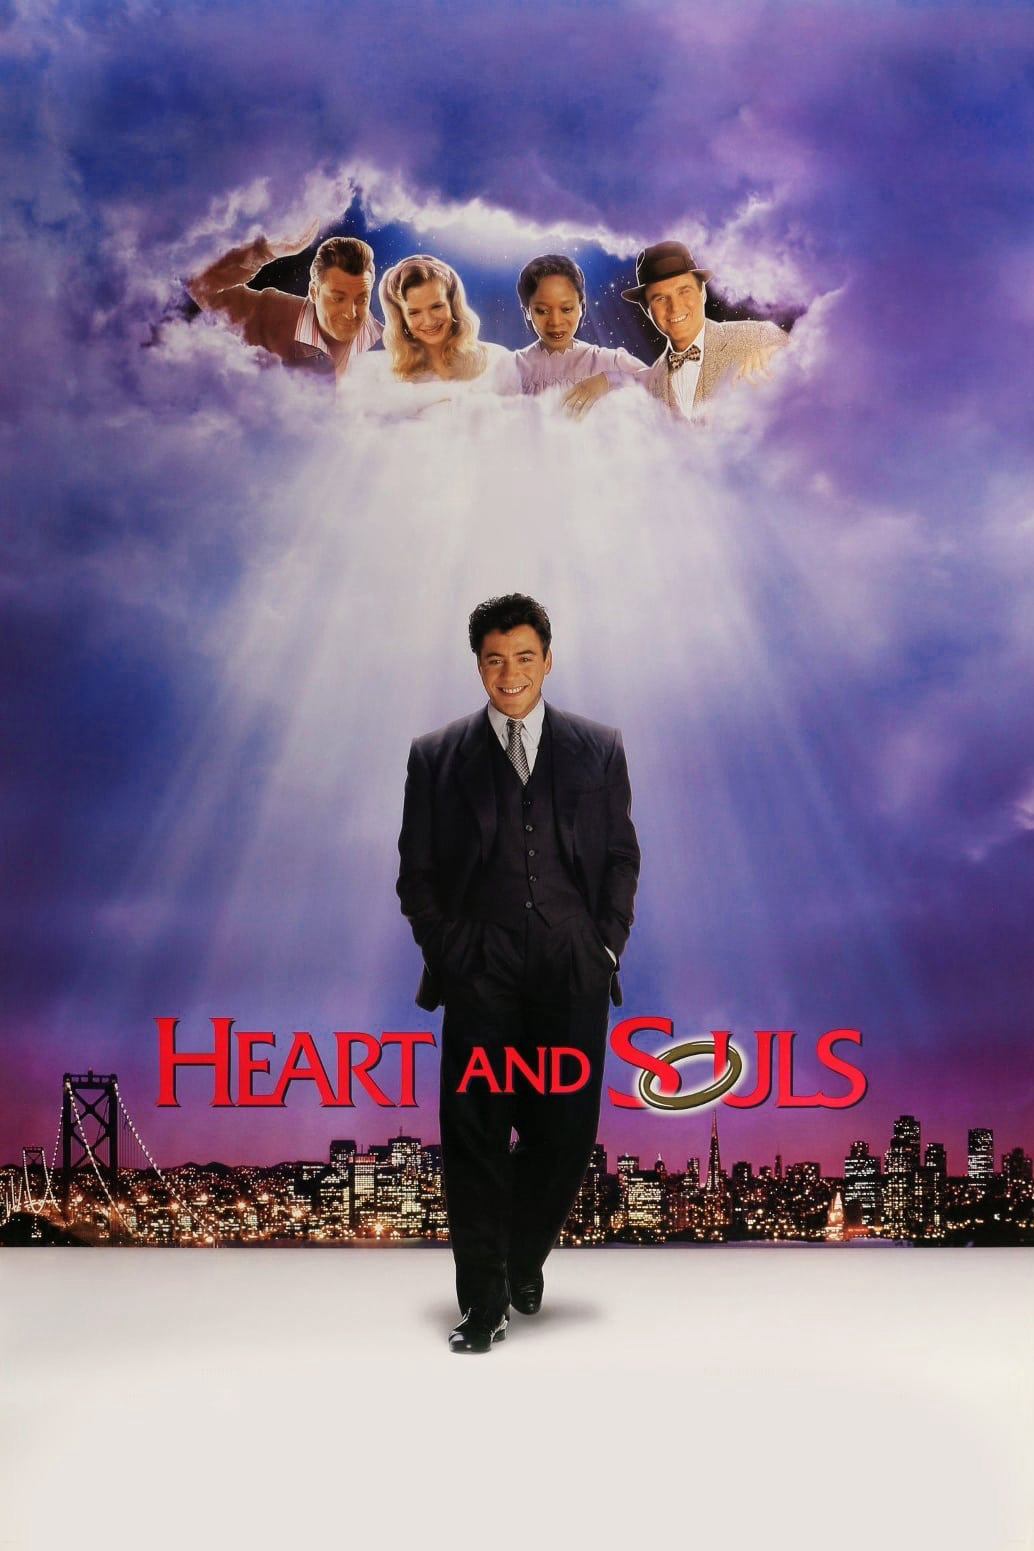 Heart and Souls (Heart and Souls) [1993]